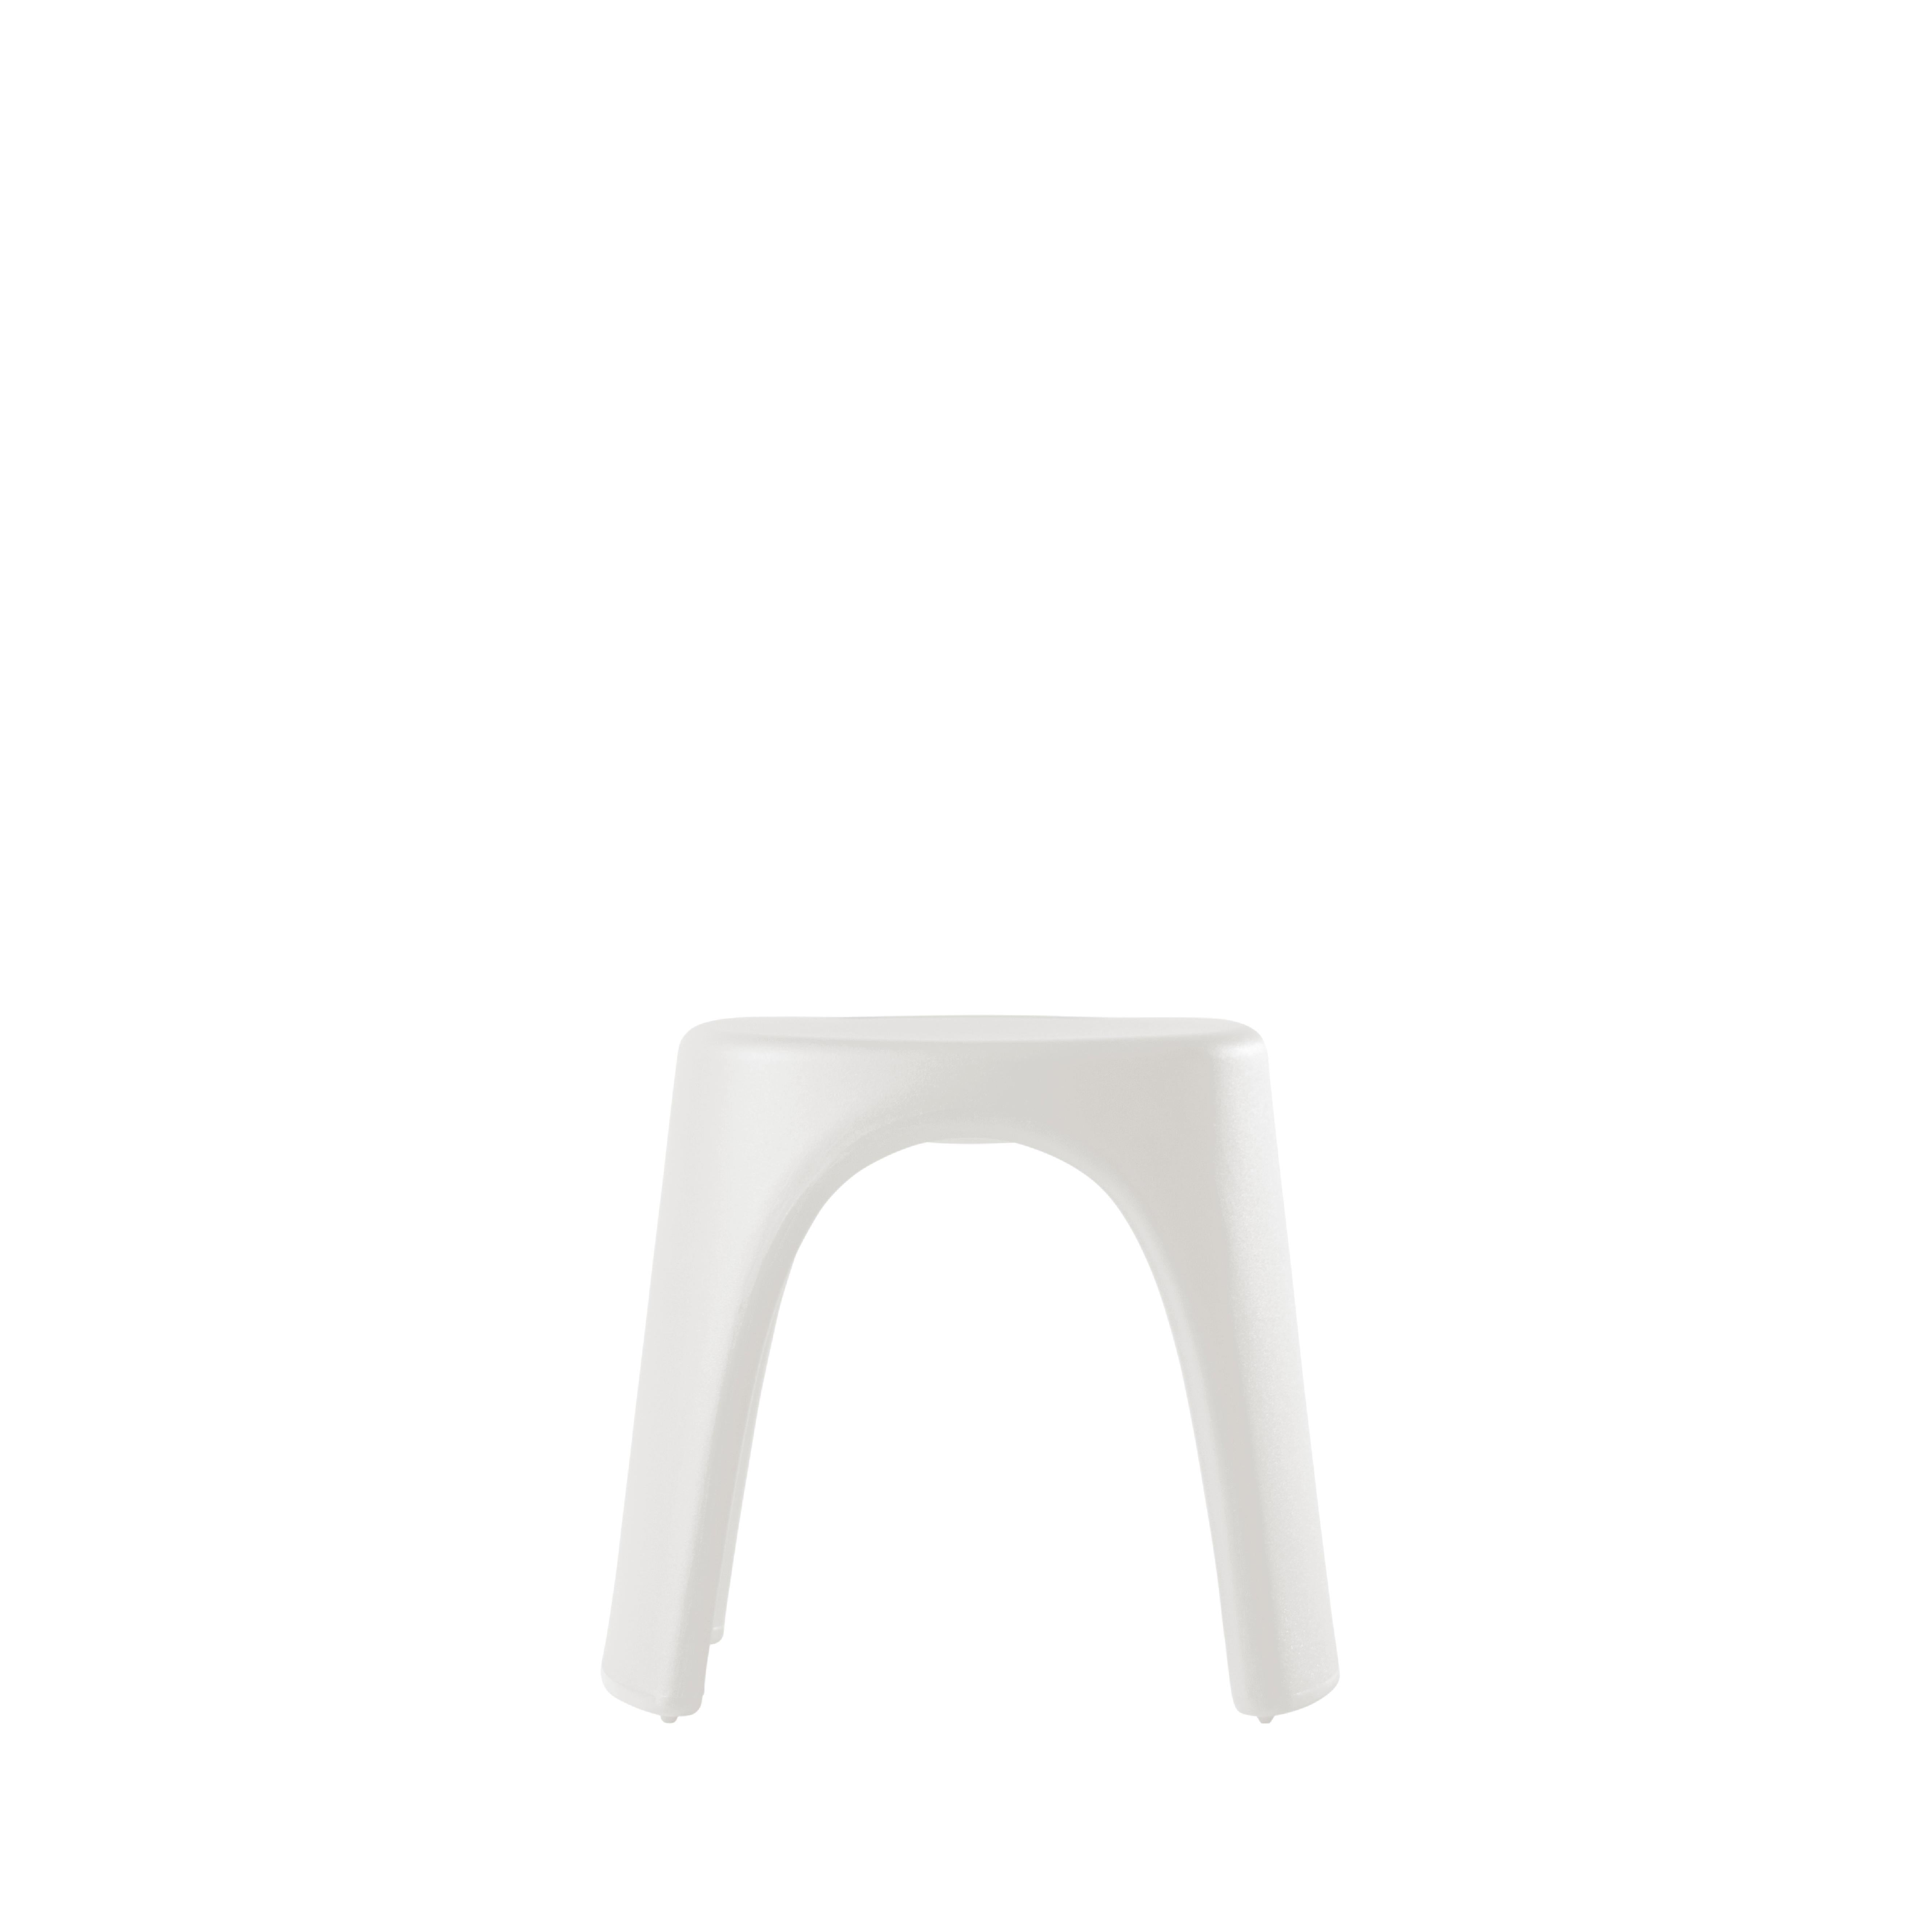 Sweet Fuschia Amélie Sgabello Stool by Italo Pertichini
Dimensions: D 40 x W 46 x H 43 cm.
Materials: Polyethylene.
Weight: 4 kg.

Available in a standard version and lacquered version. Prices may vary. Available in different color options. This